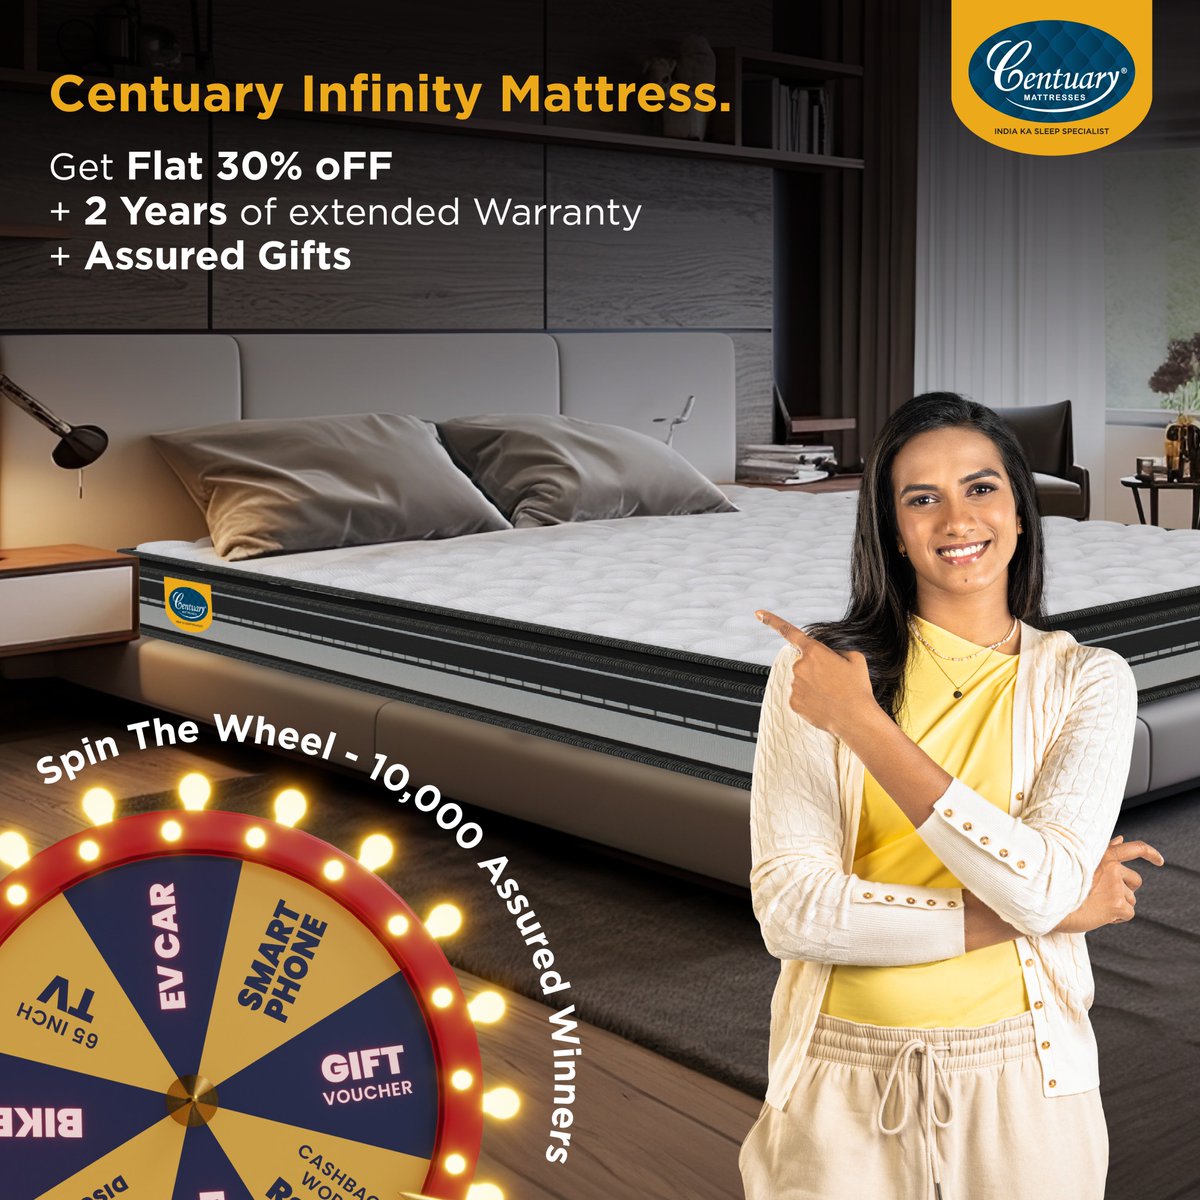 Take home the Centuary #HybridInfinityMattress and make your #festiveseason truly comfy. 

Enjoy incredible discounts and assured gifts on every purchase.

#Centuary #FestiveComfort #MattressSale #FestiveOffers #Discounts #MattressShopping #LimitedOffer #IndiaKaSleepSpecialist